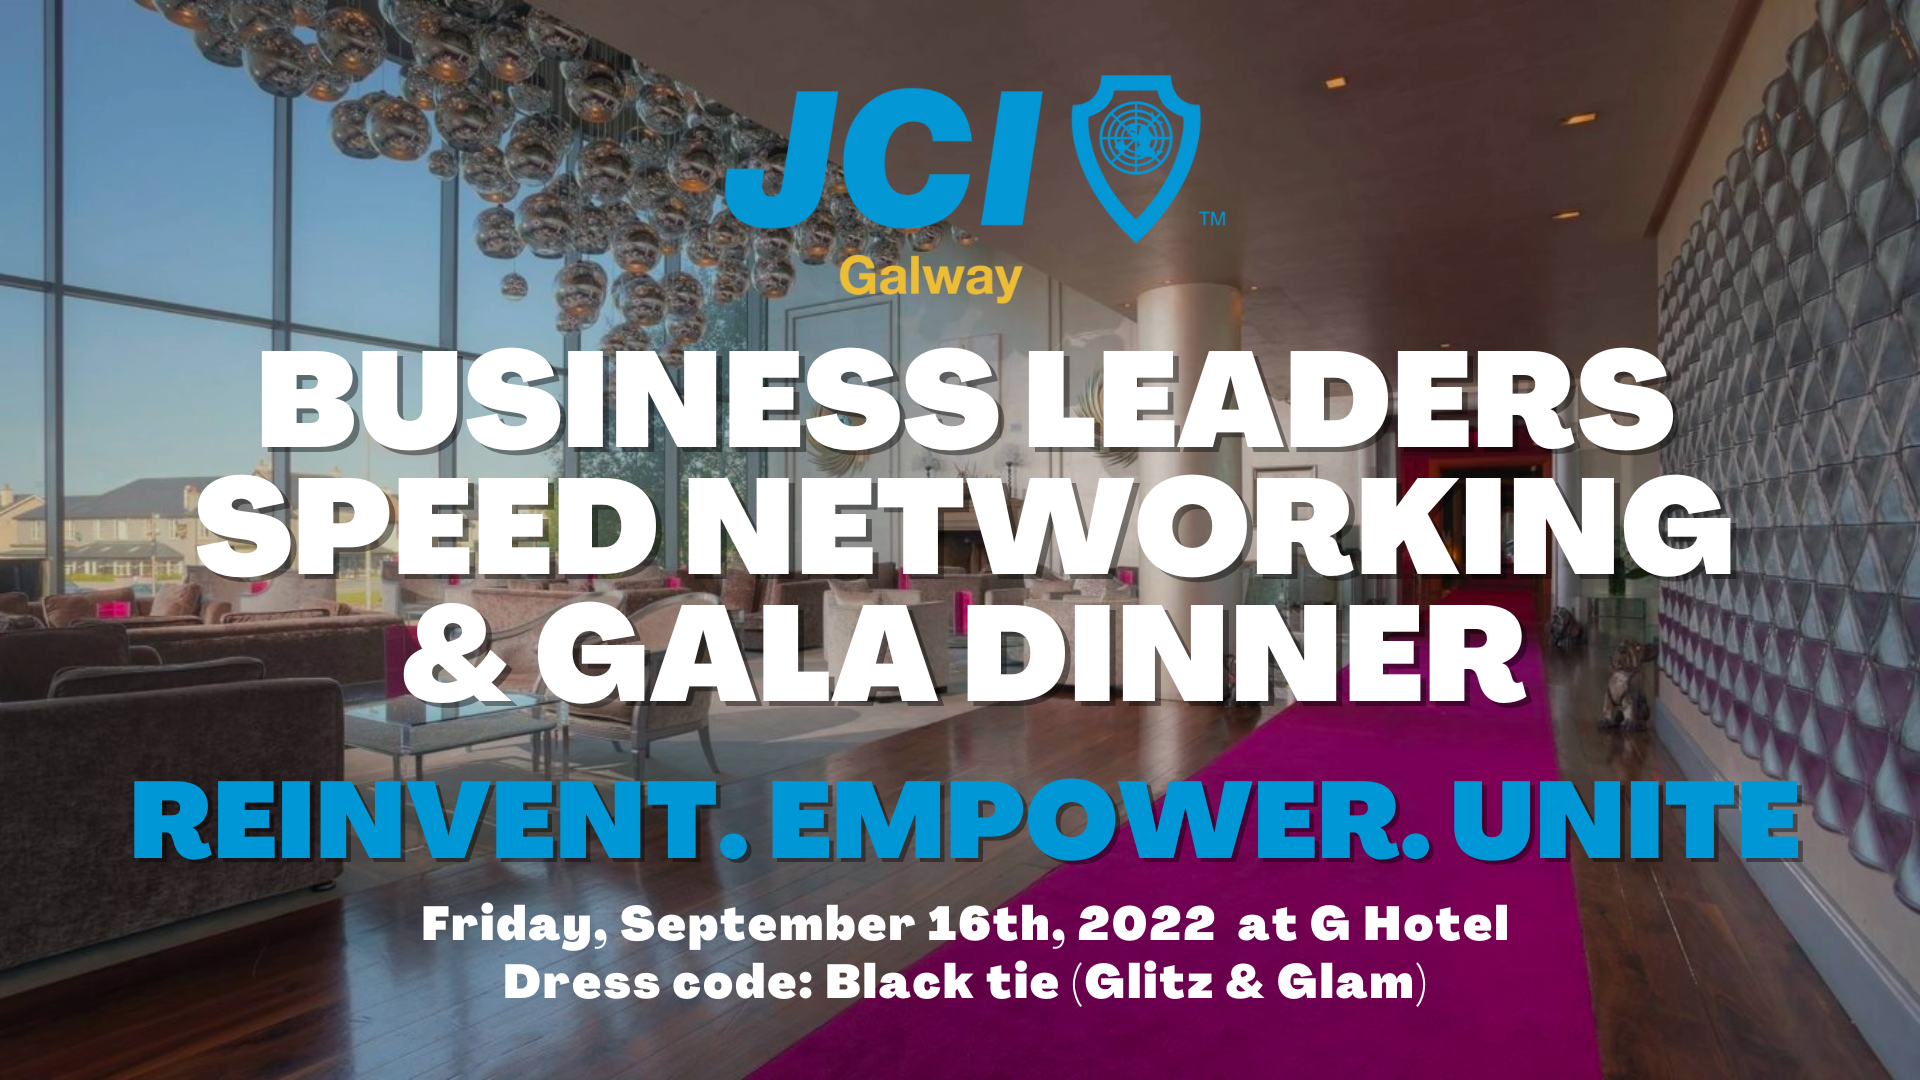 JCI Galway Business Leaders Speed Networking Gala Dinner